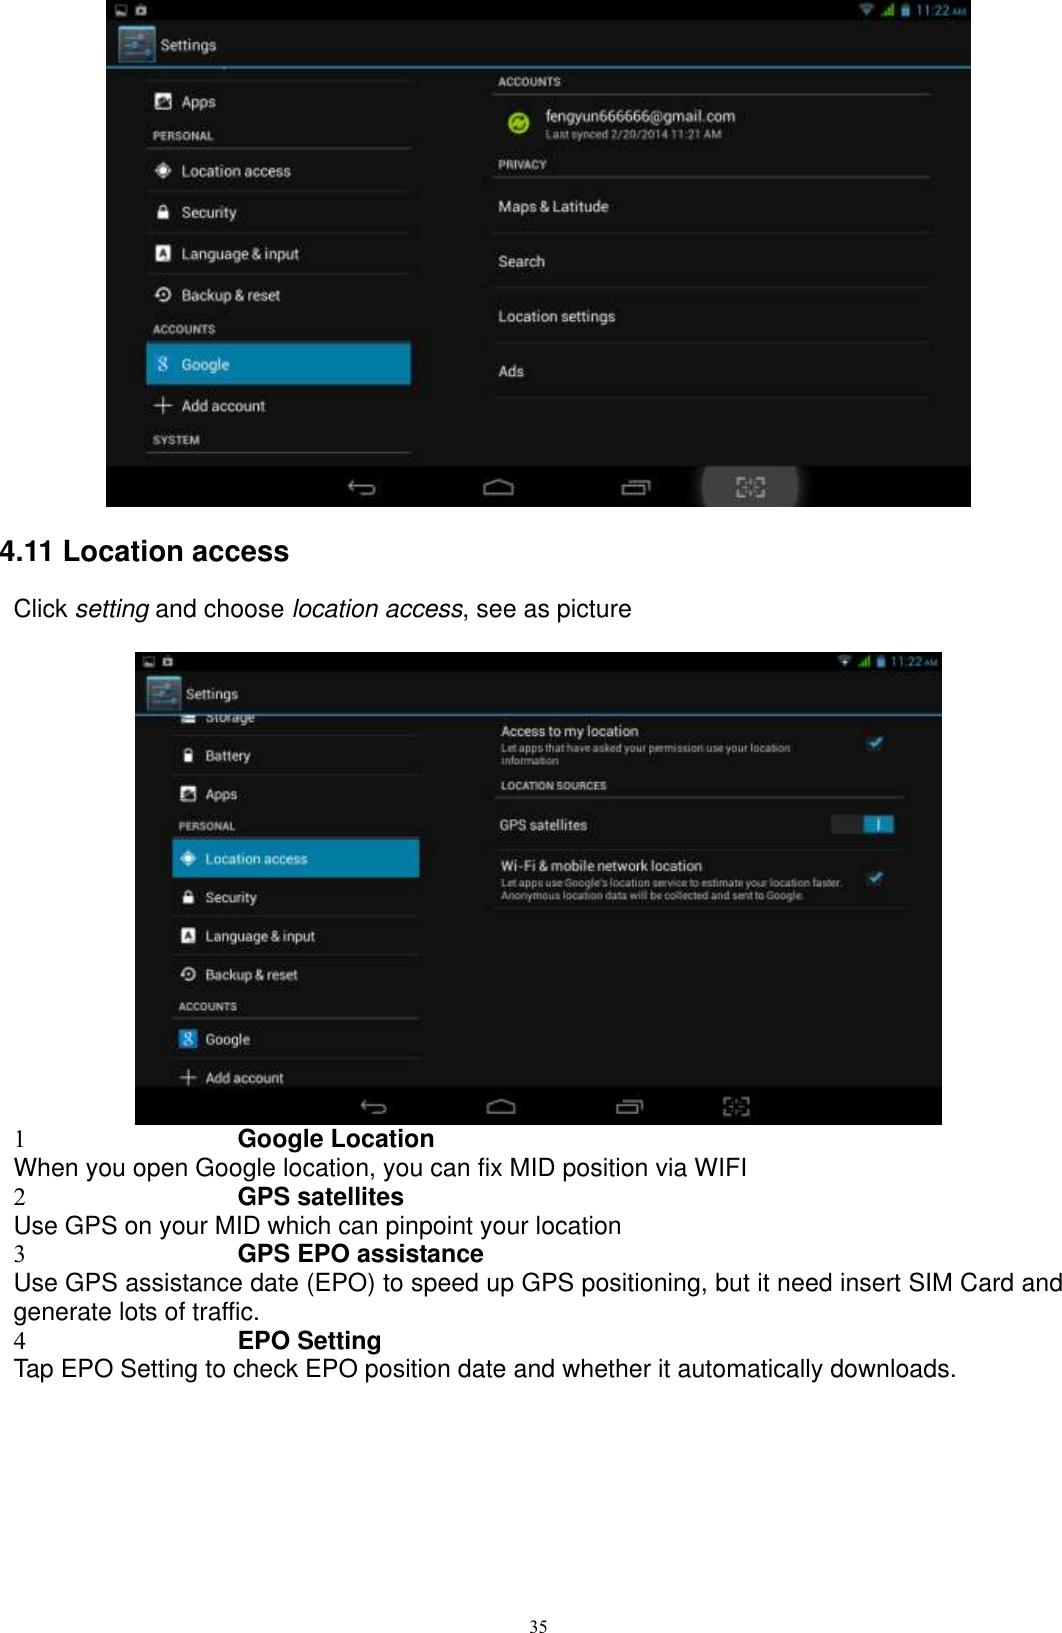      35  4.11 Location access Click setting and choose location access, see as picture       1 Google Location When you open Google location, you can fix MID position via WIFI 2 GPS satellites Use GPS on your MID which can pinpoint your location 3 GPS EPO assistance Use GPS assistance date (EPO) to speed up GPS positioning, but it need insert SIM Card and generate lots of traffic. 4 EPO Setting Tap EPO Setting to check EPO position date and whether it automatically downloads.   